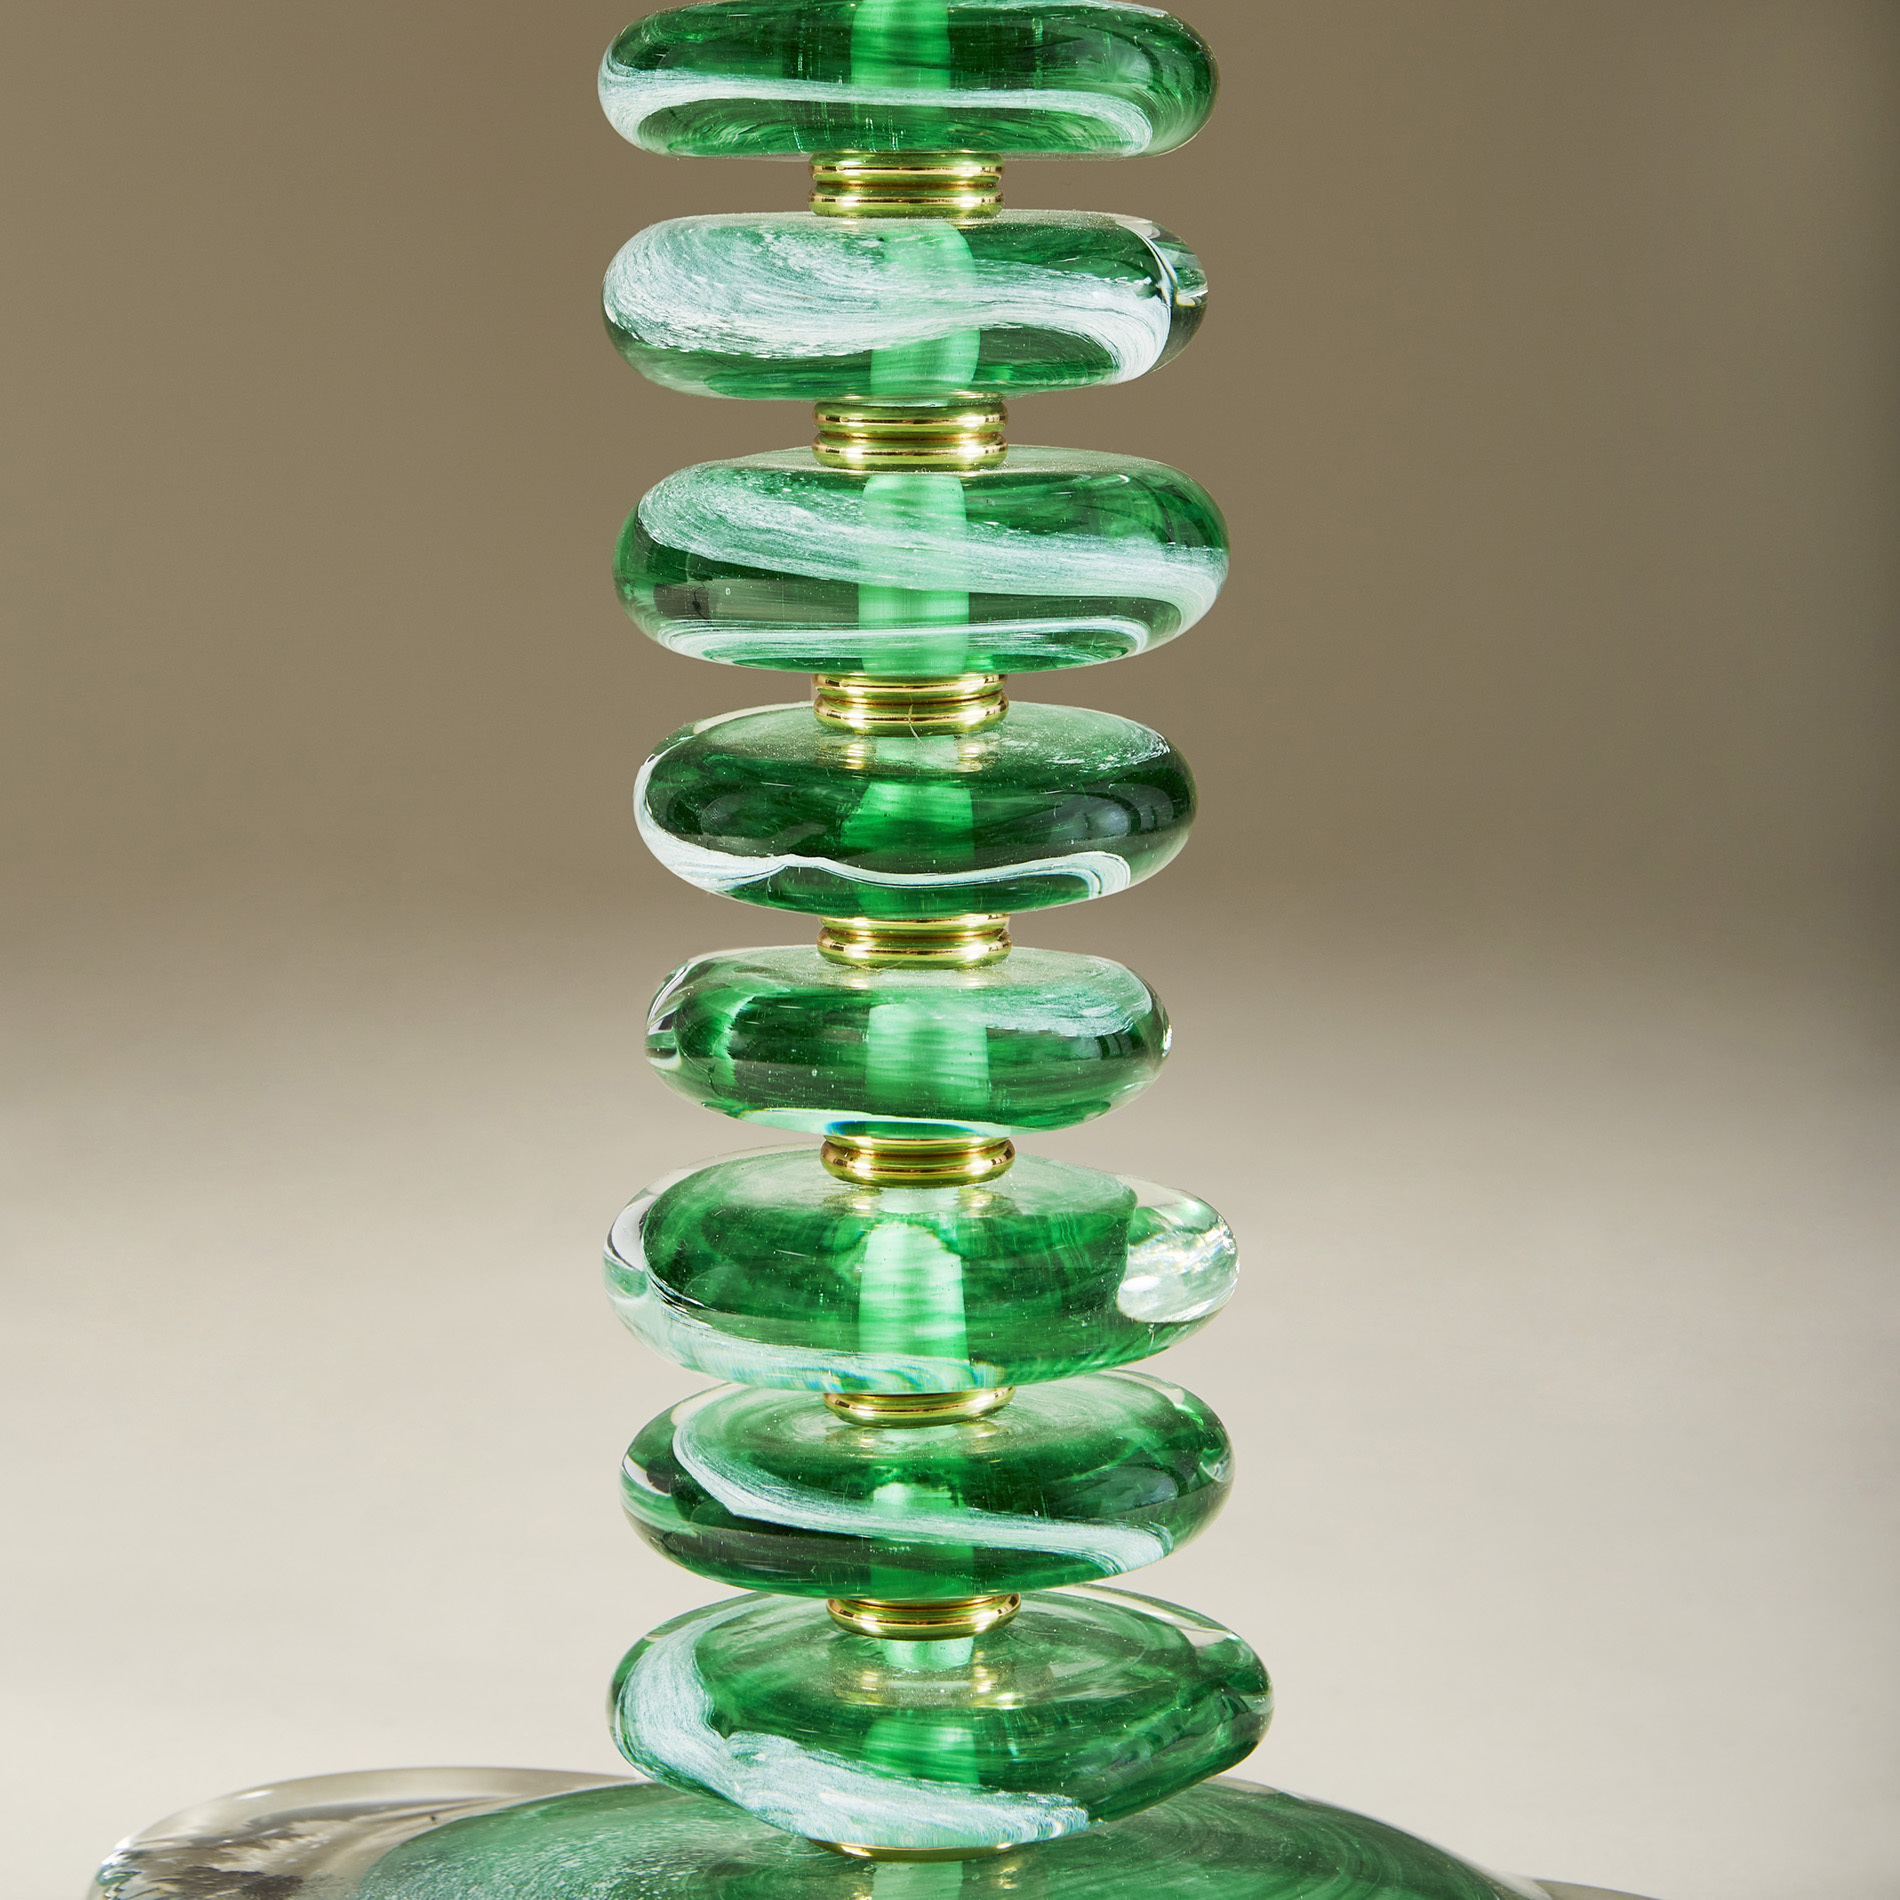 The image for Green Glass Pebble Lamp 0033 V1